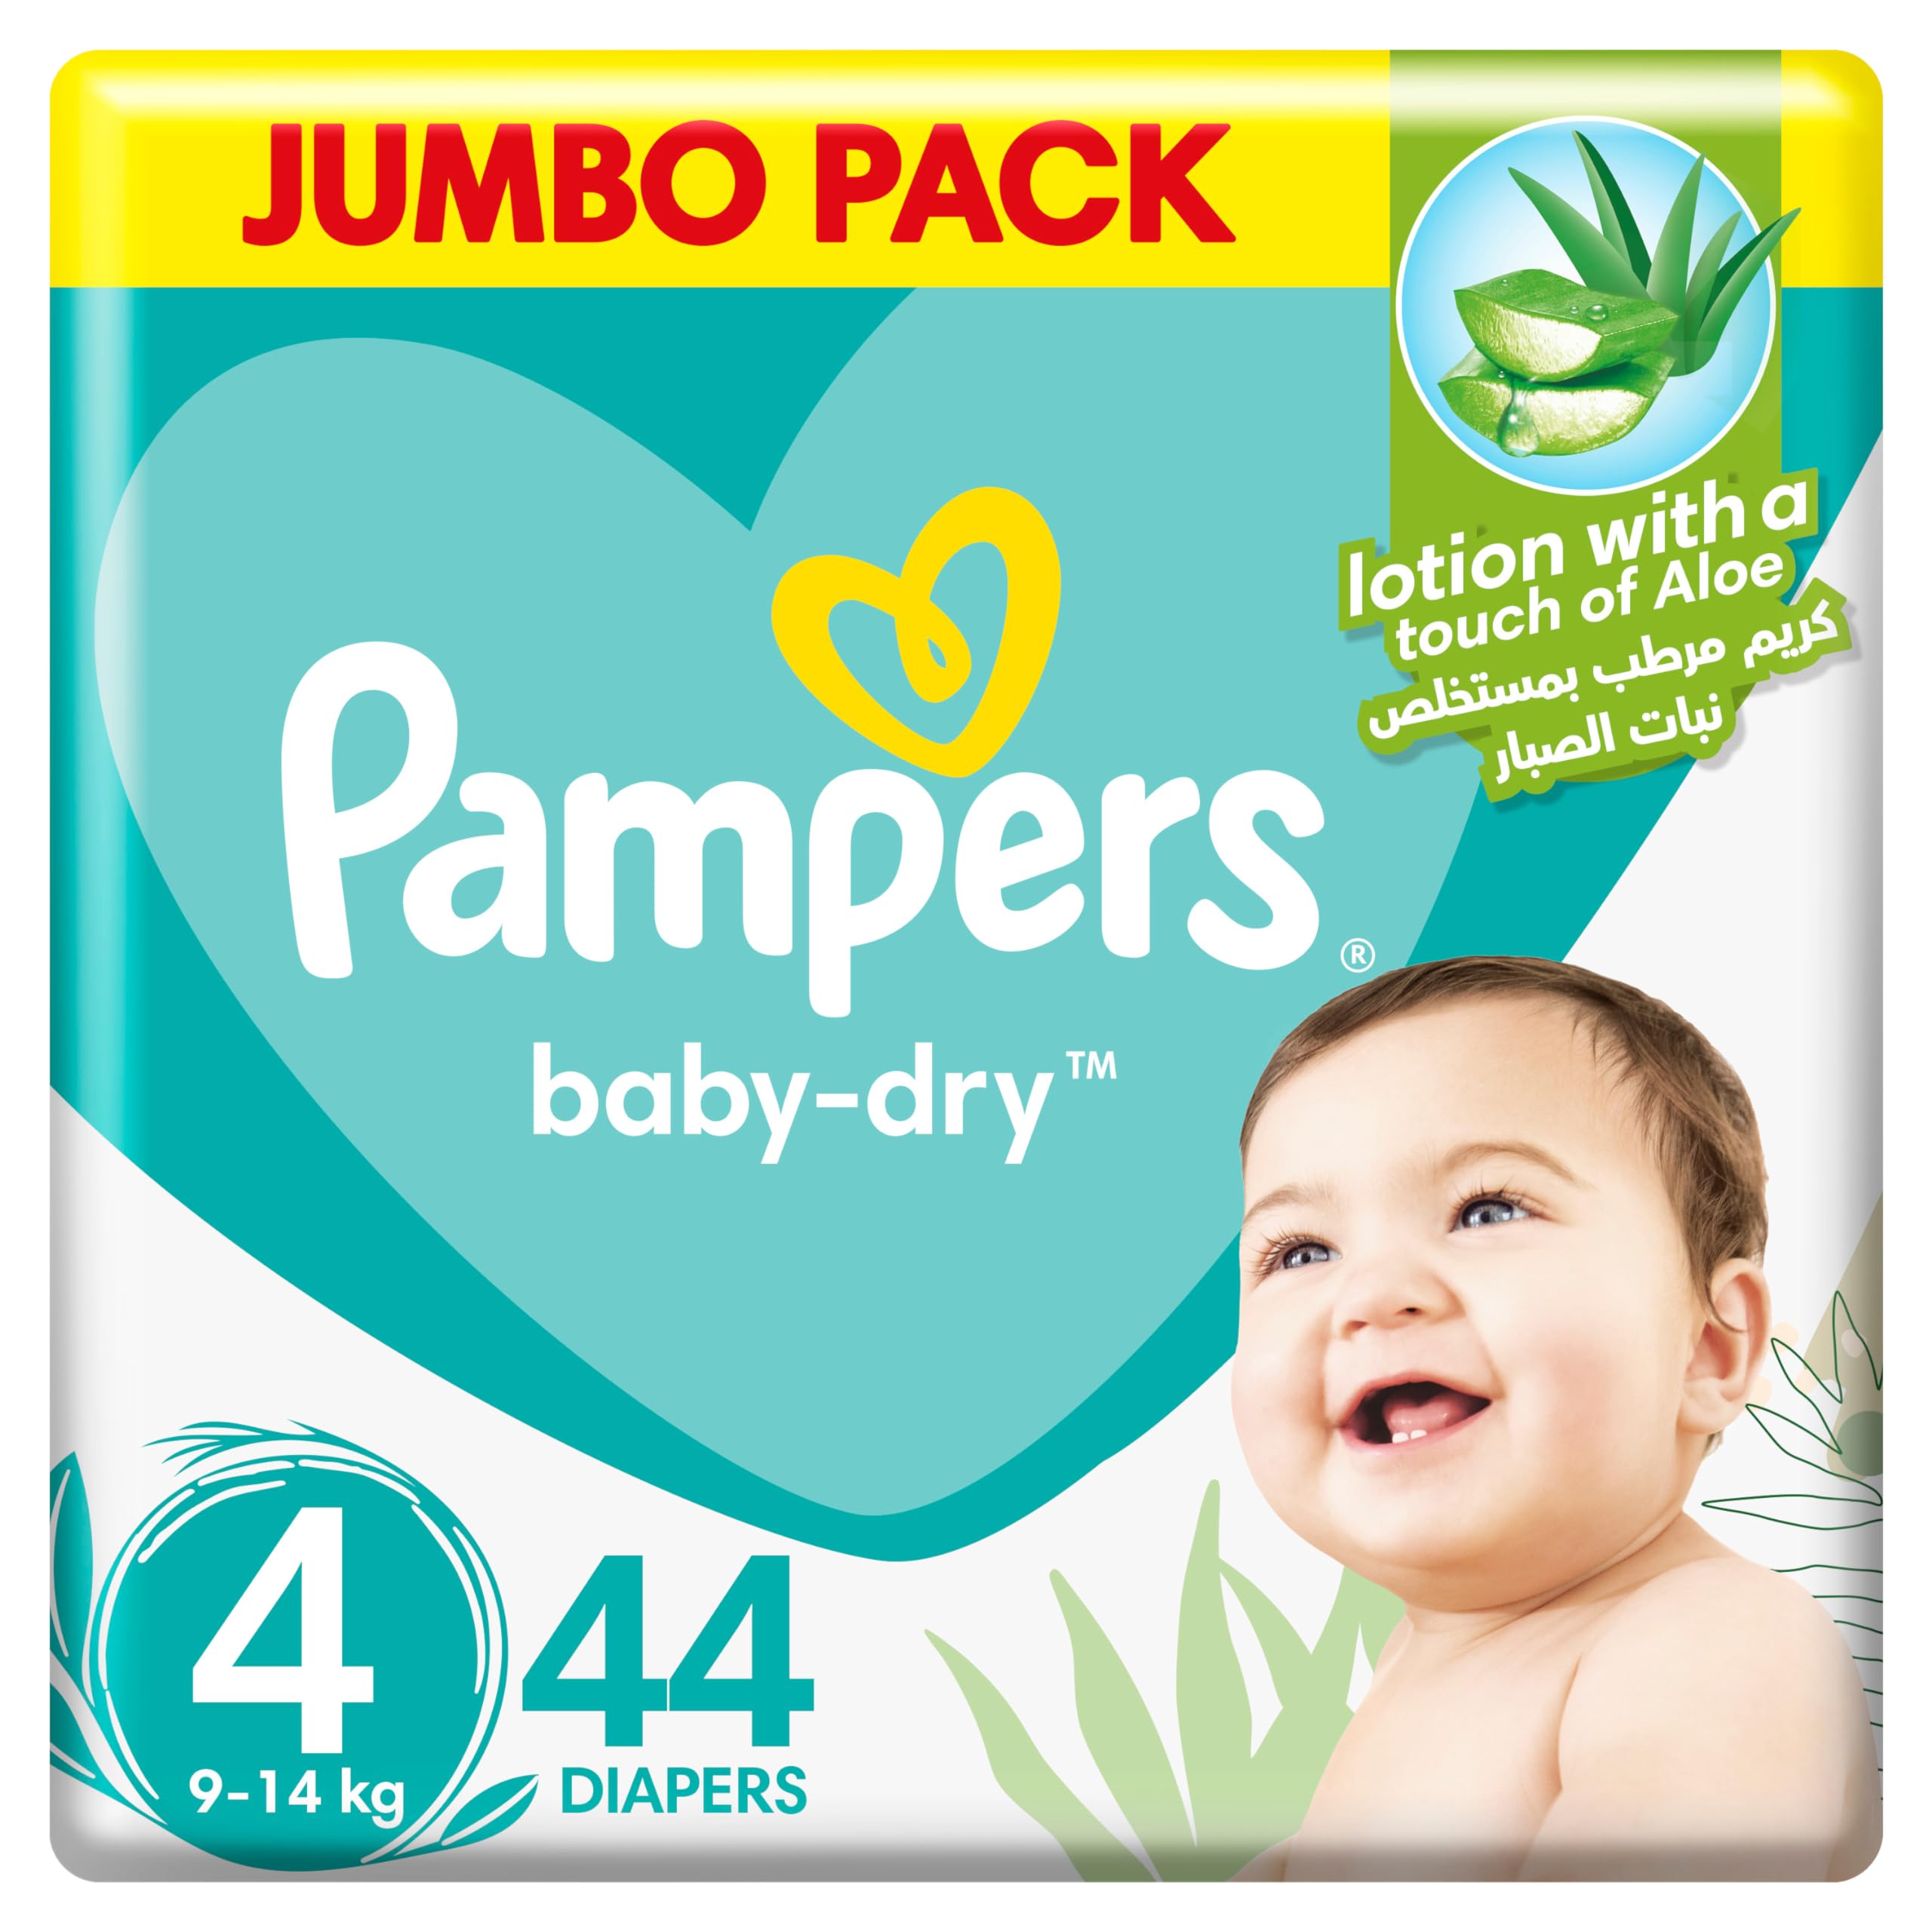 pieluchy pampers active baby 3 tesco